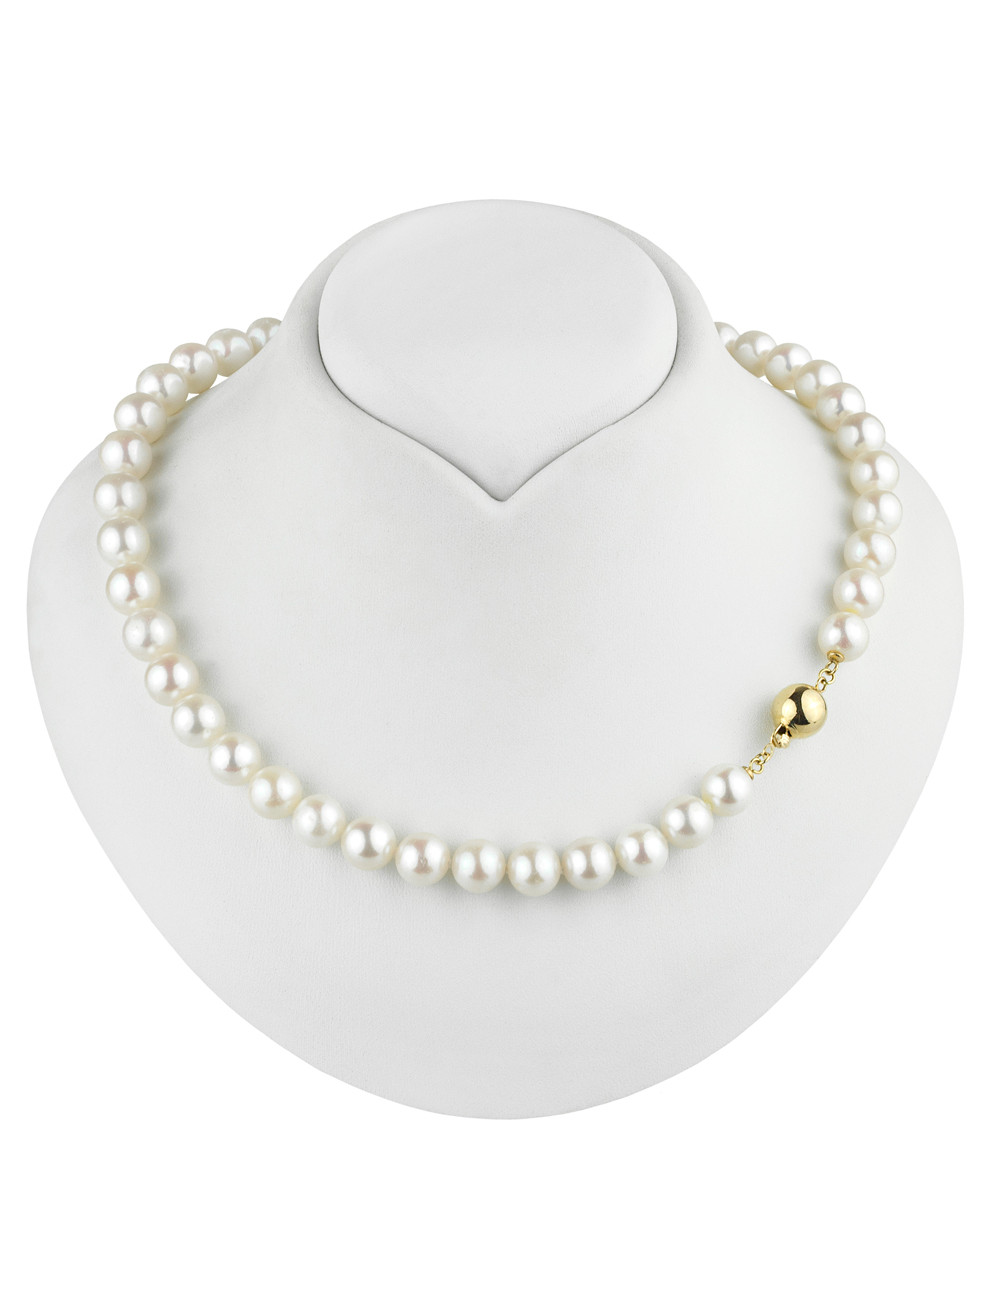 Large white pearl necklace with gold ball clasp NO9510G3